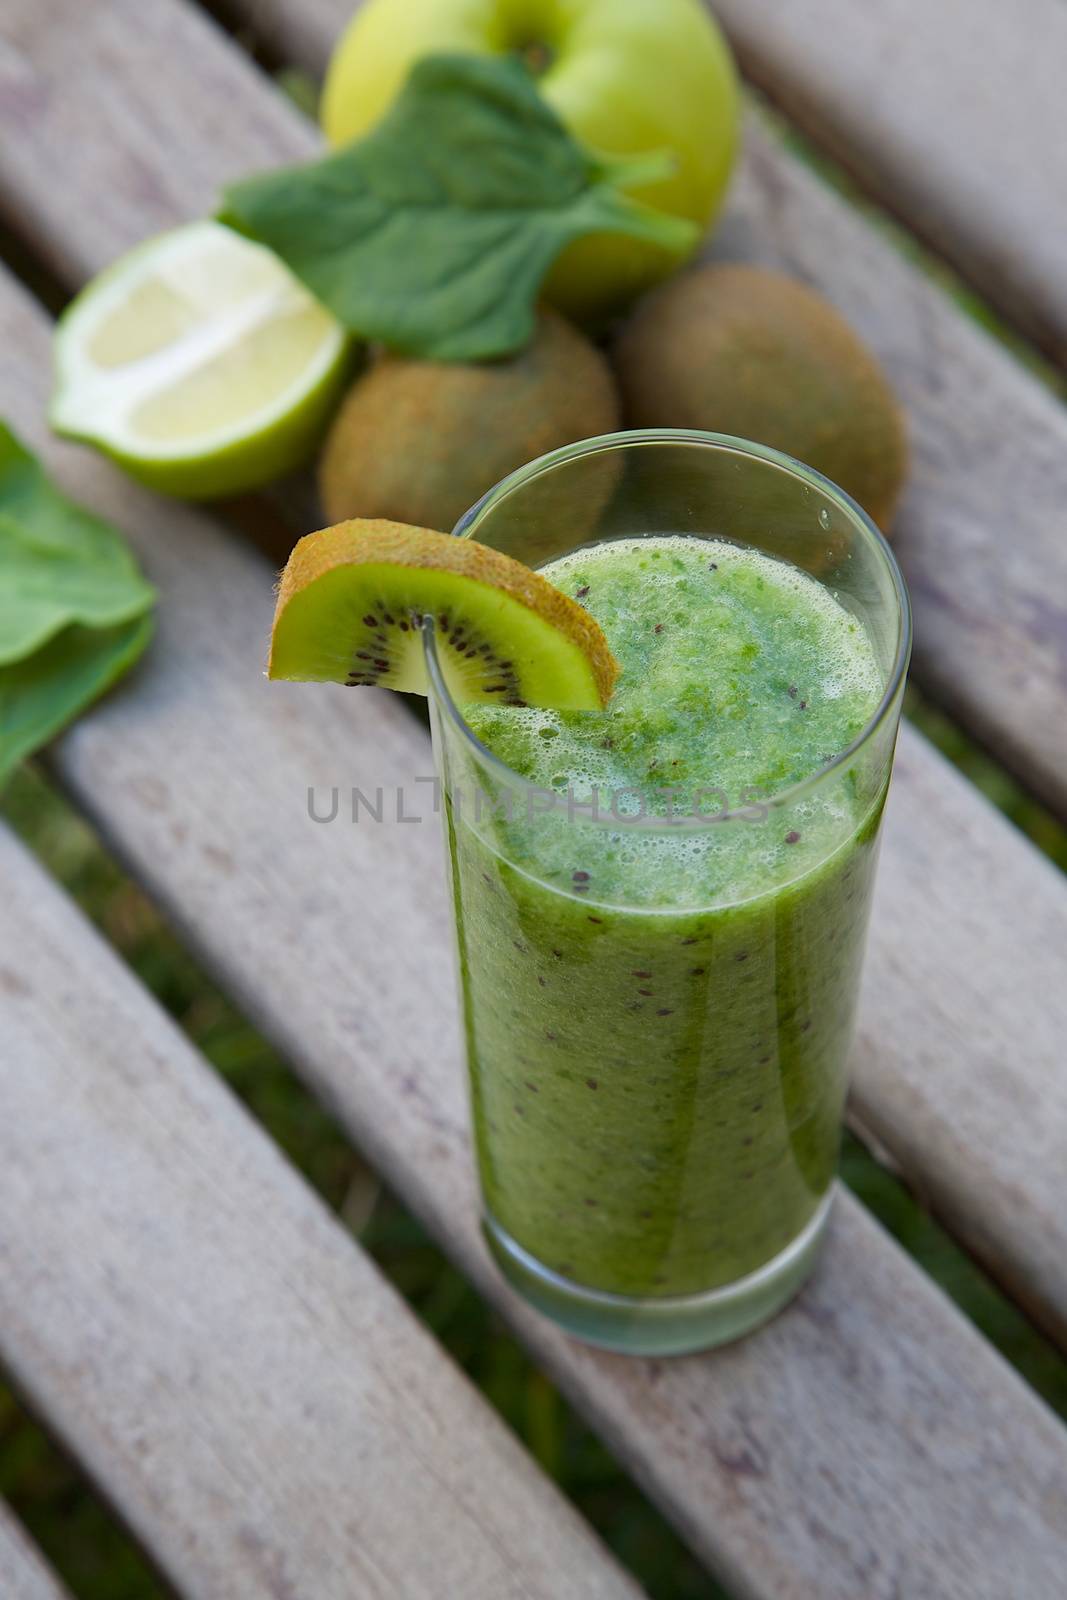 Spinach-kiwi-green apple smoothie in the glass. Kiwi, spinach leaves,green apple and lemon in the background